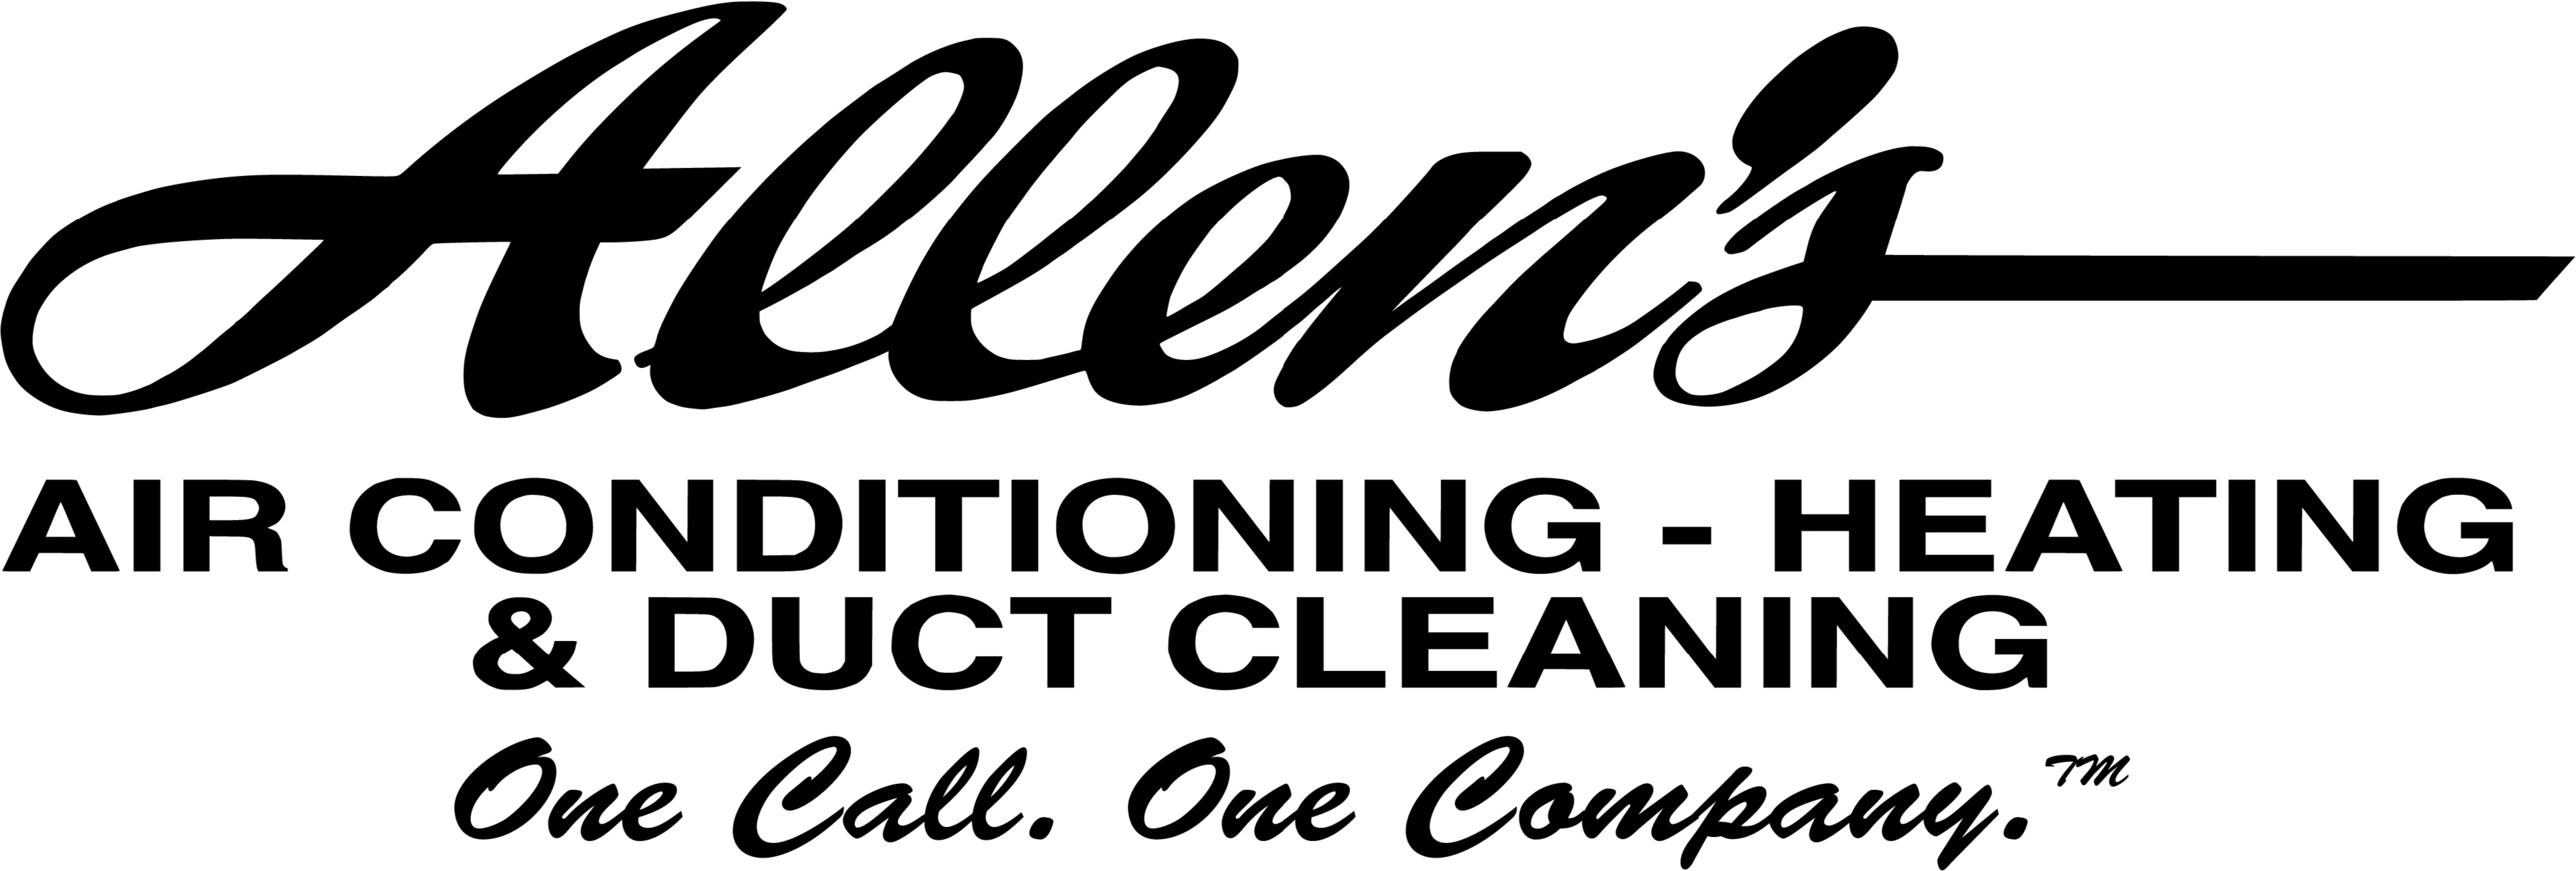 Allen's Air Conditioning Heating & Duct Cleaning - Southern HVAC